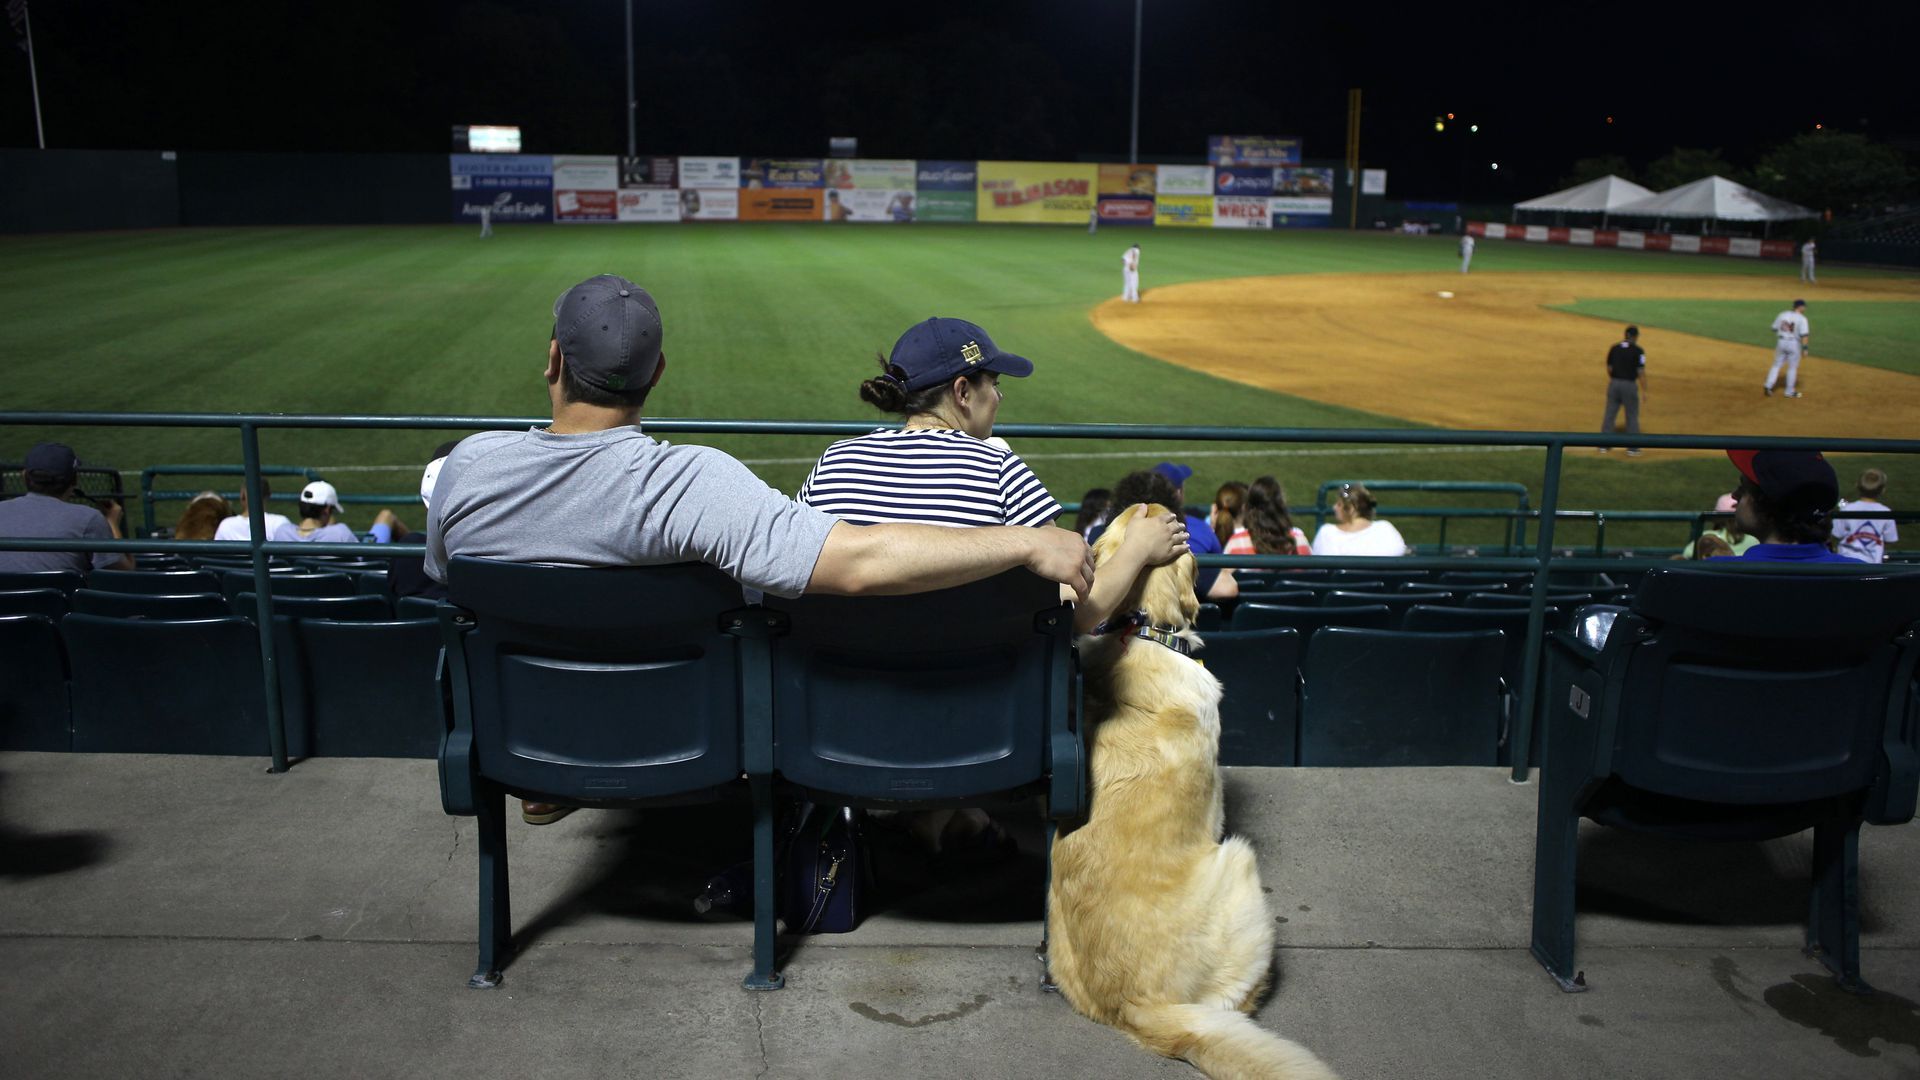 People and a dog at a baseball game.